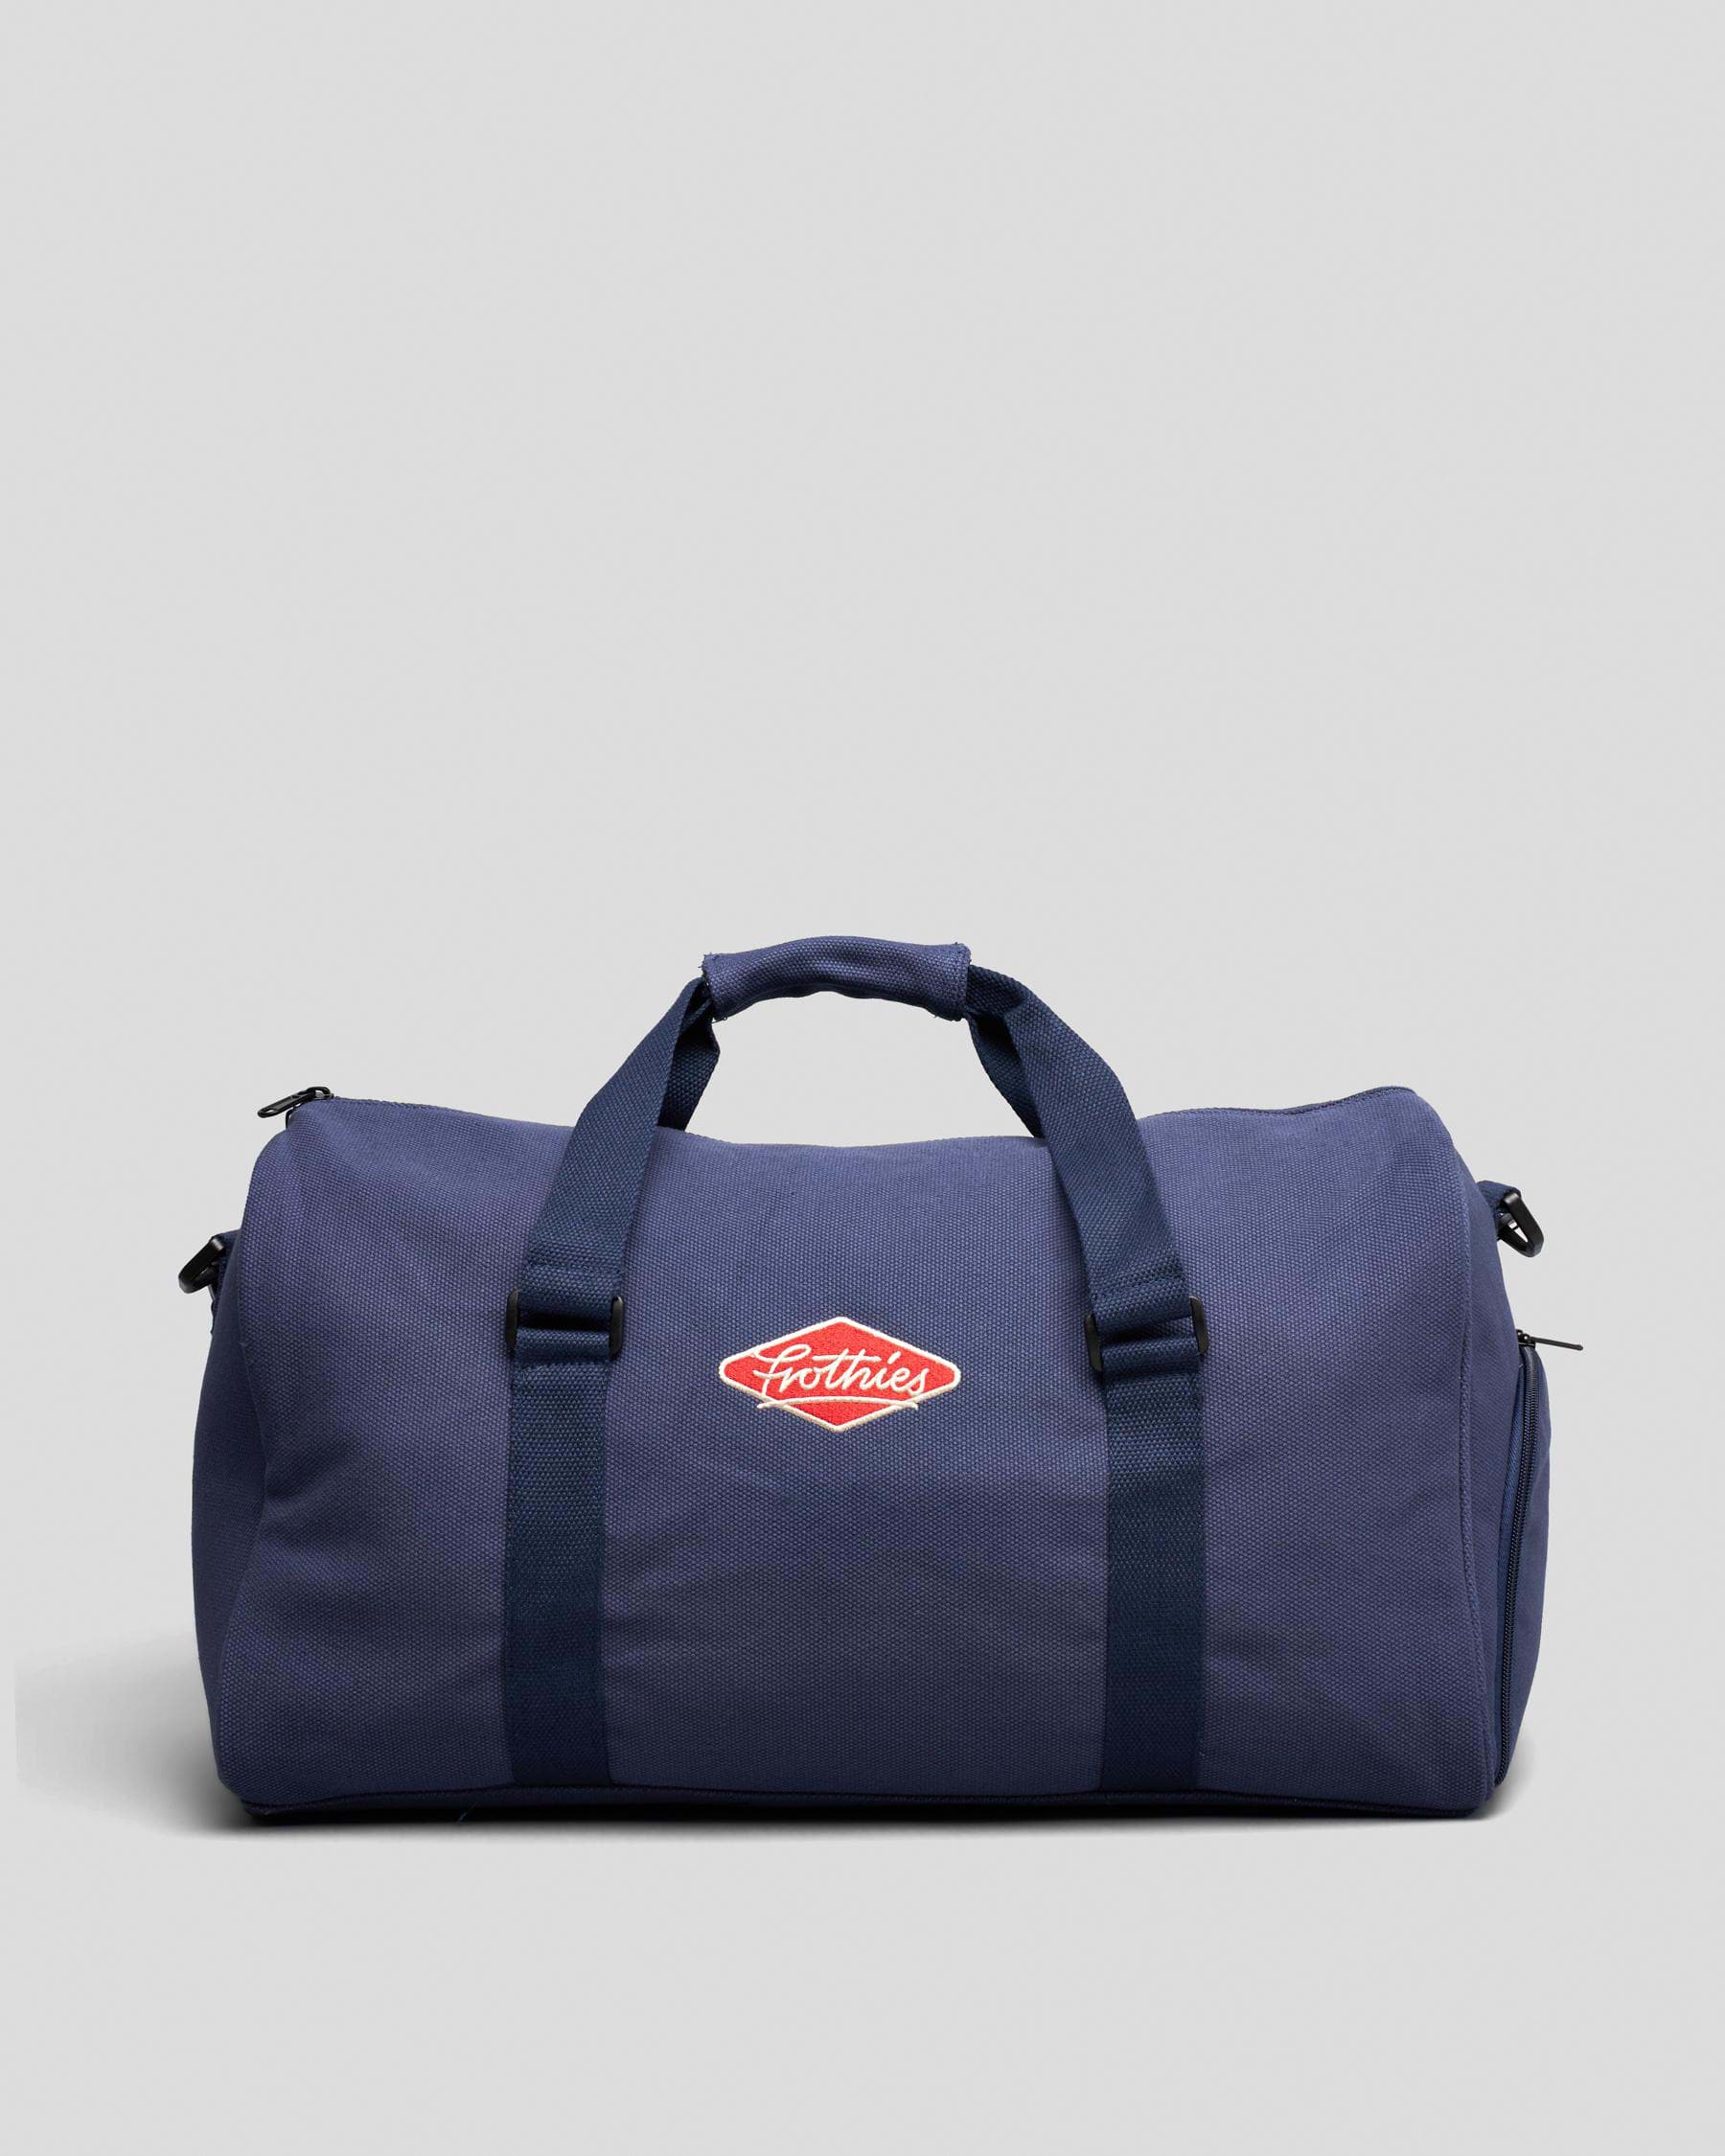 Shop Frothies George Wilson Duffle Bag In Navy - Fast Shipping & Easy ...